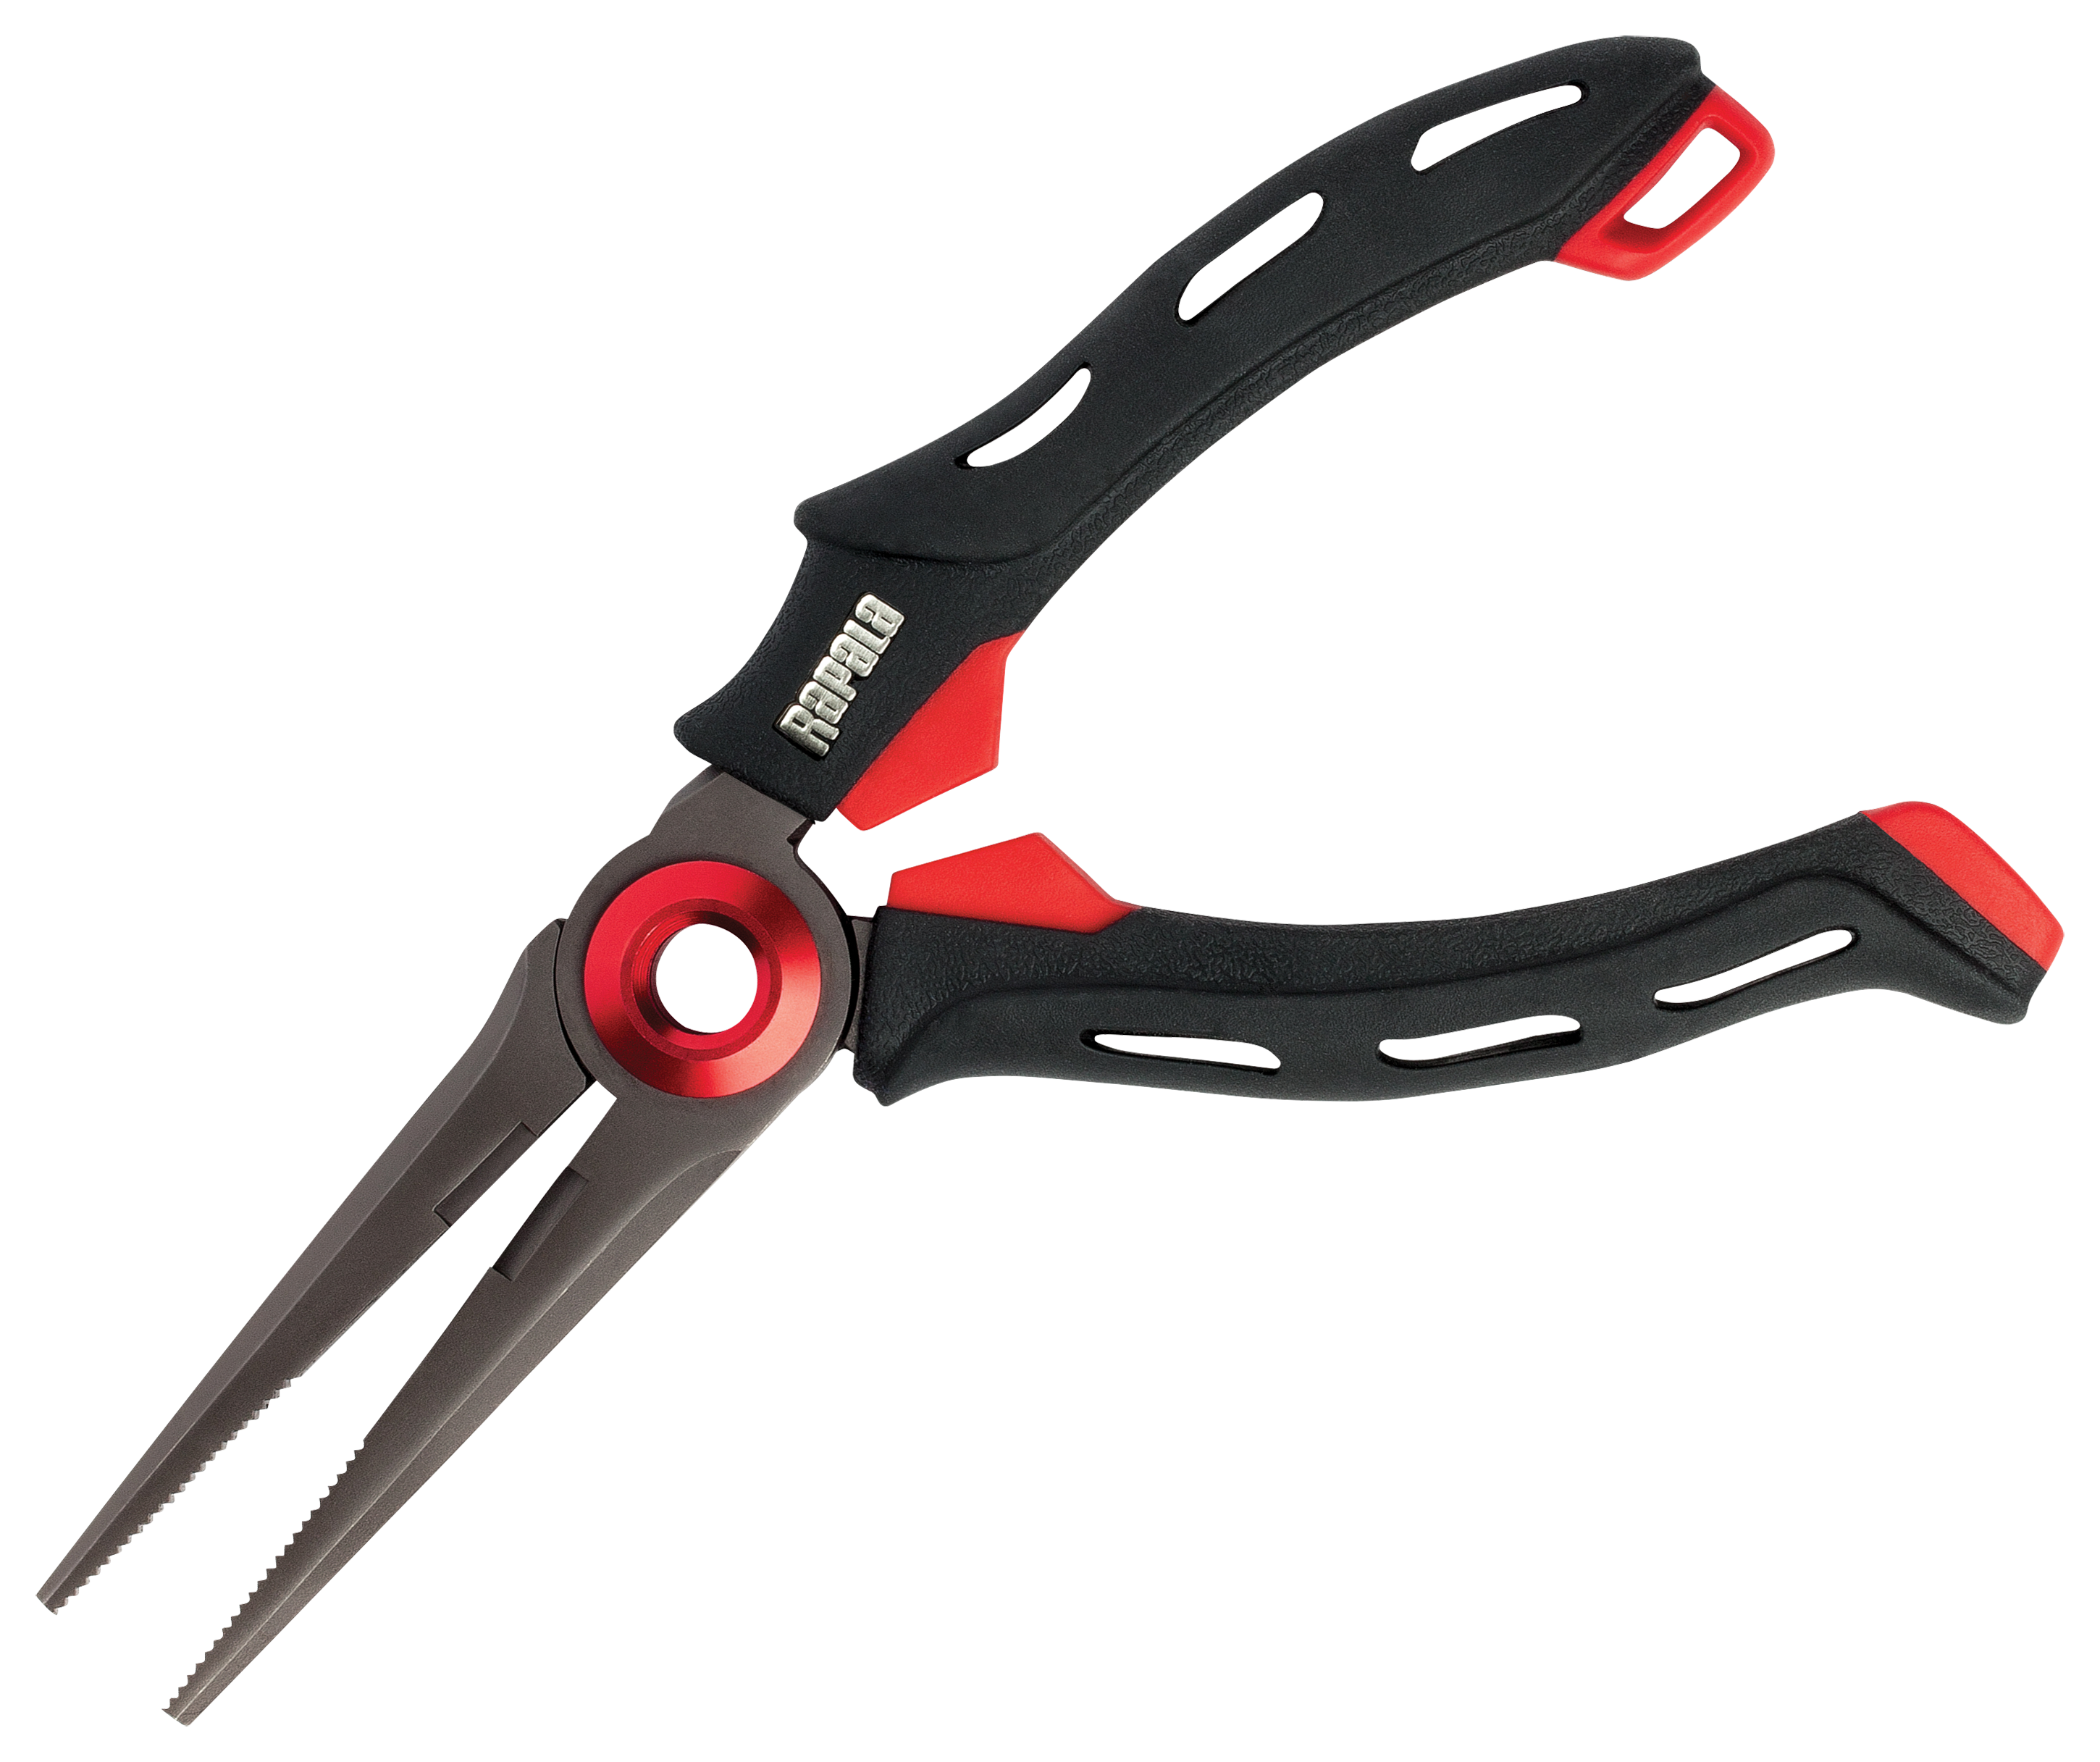 Rapala Pro Select Fish Pliers, 6-in